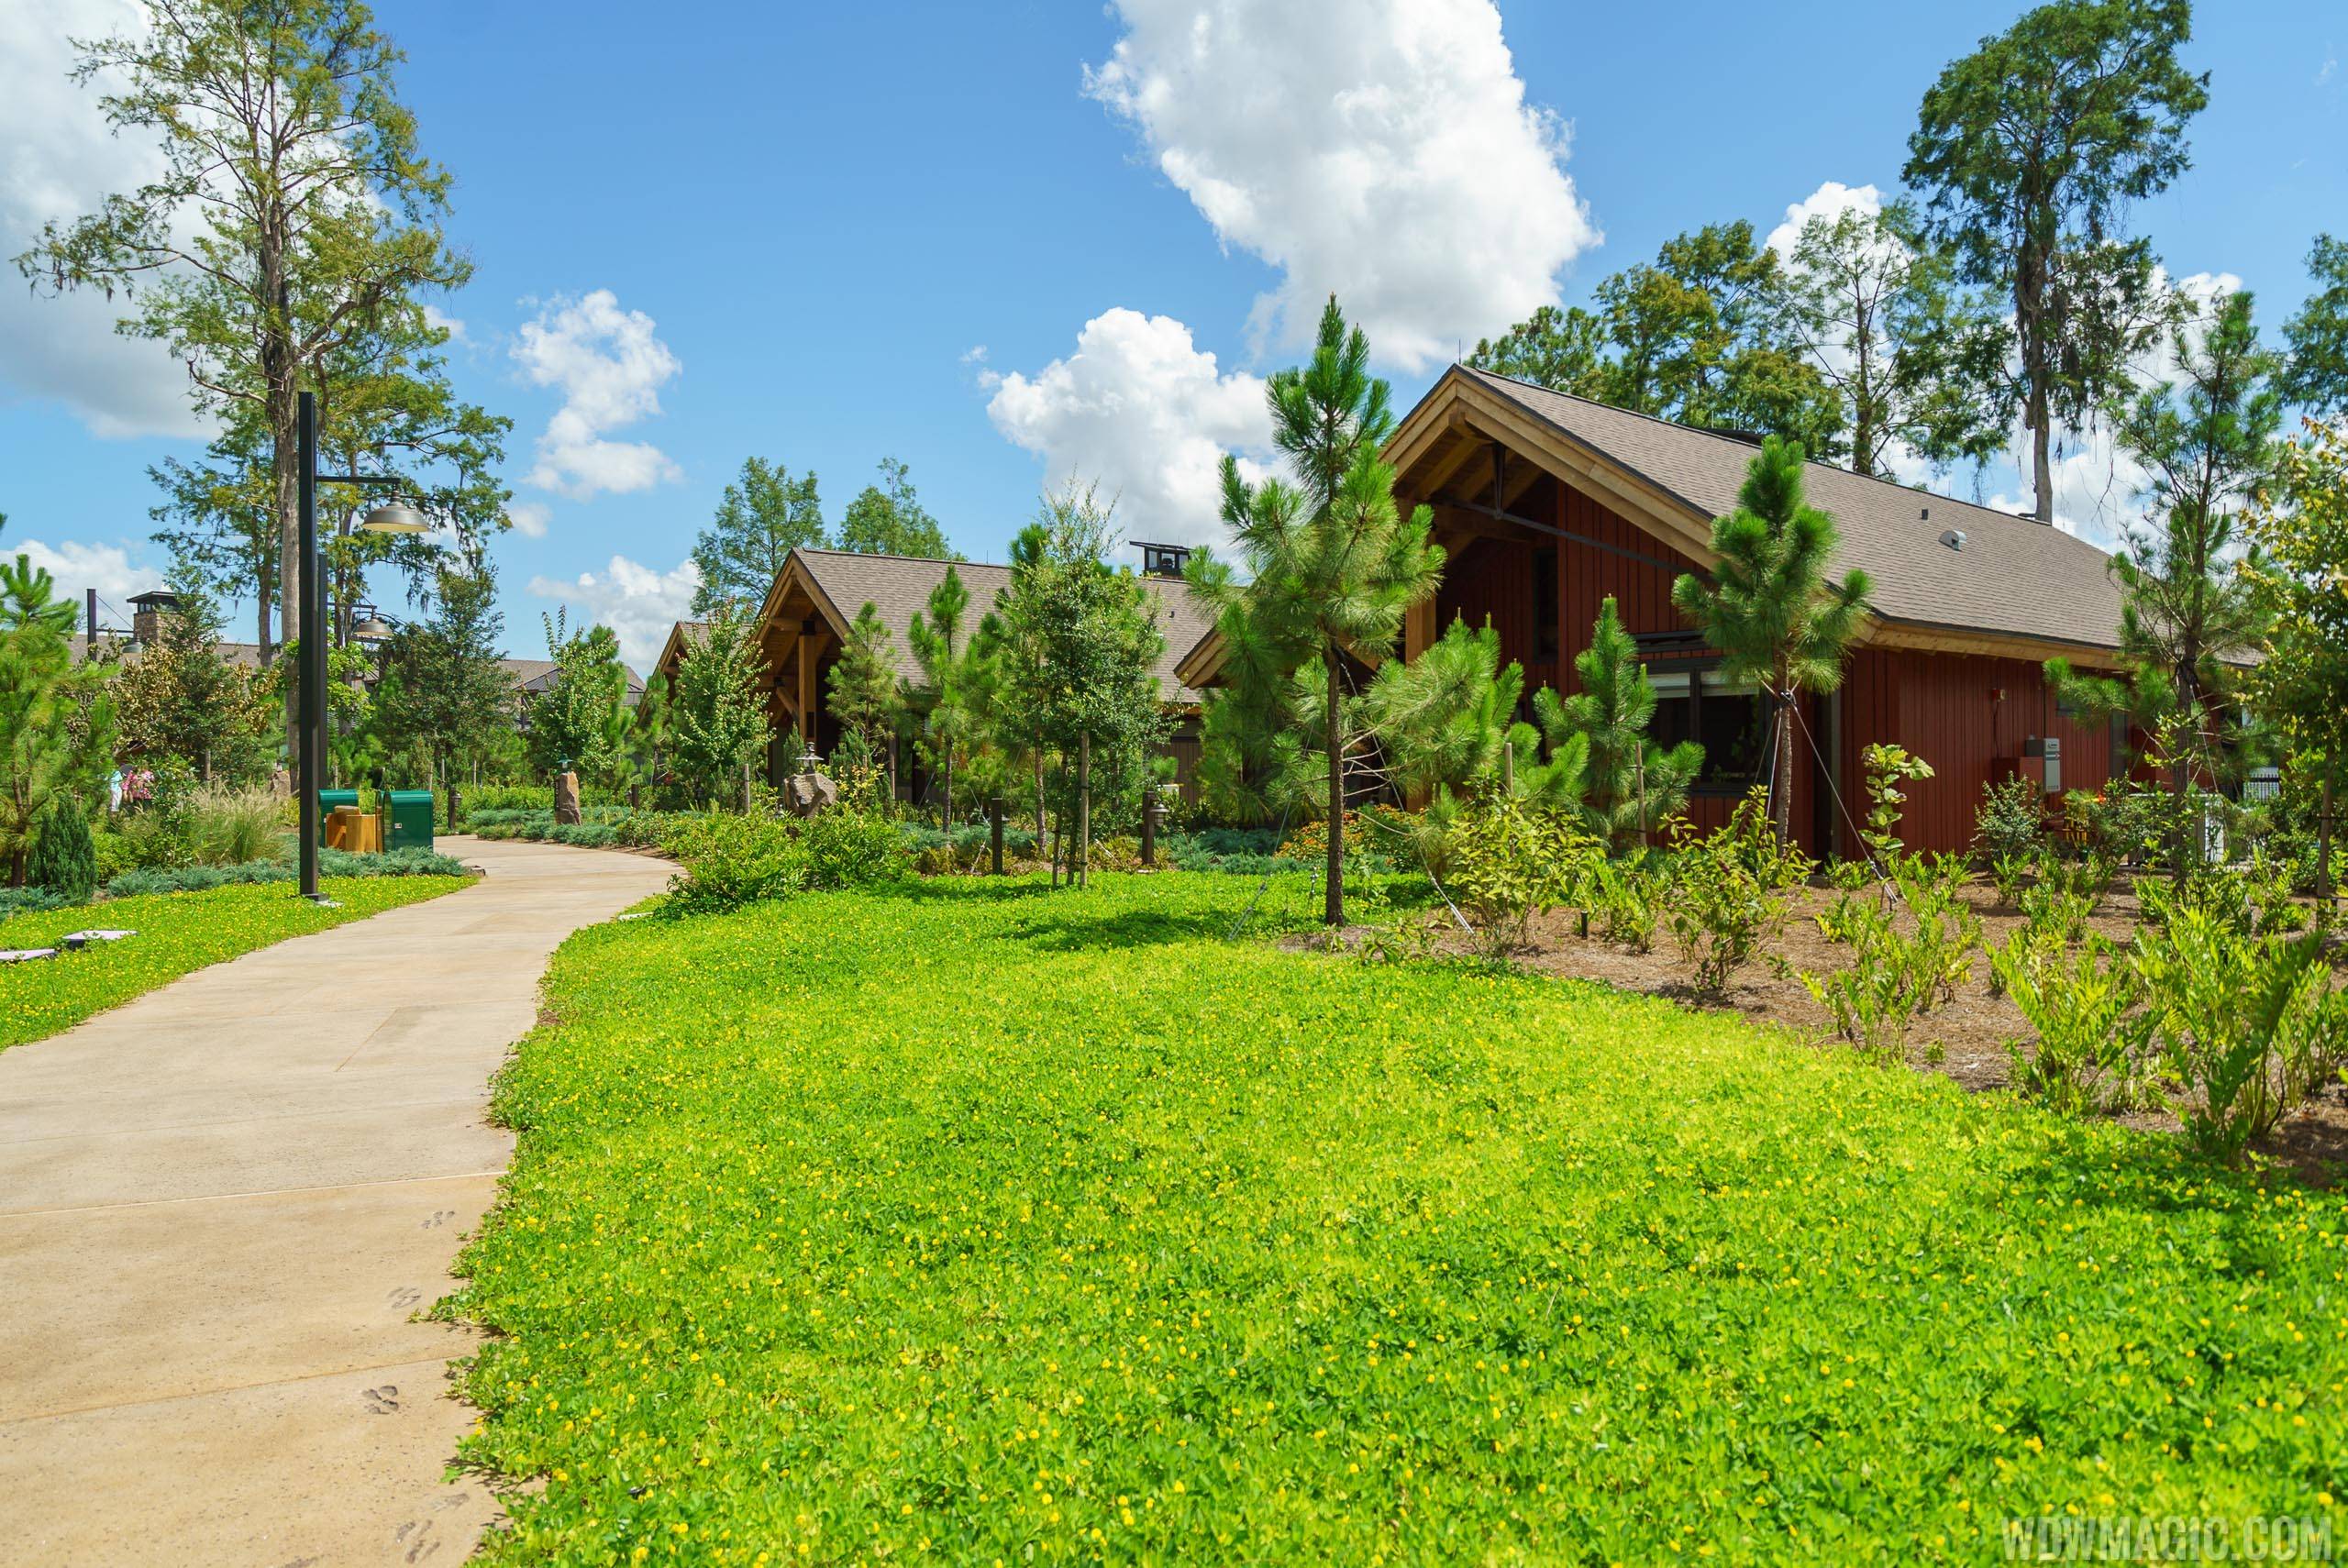 Copper Creek Villas and Cabins at Disney's Wilderness Lodge - View of the Cabins